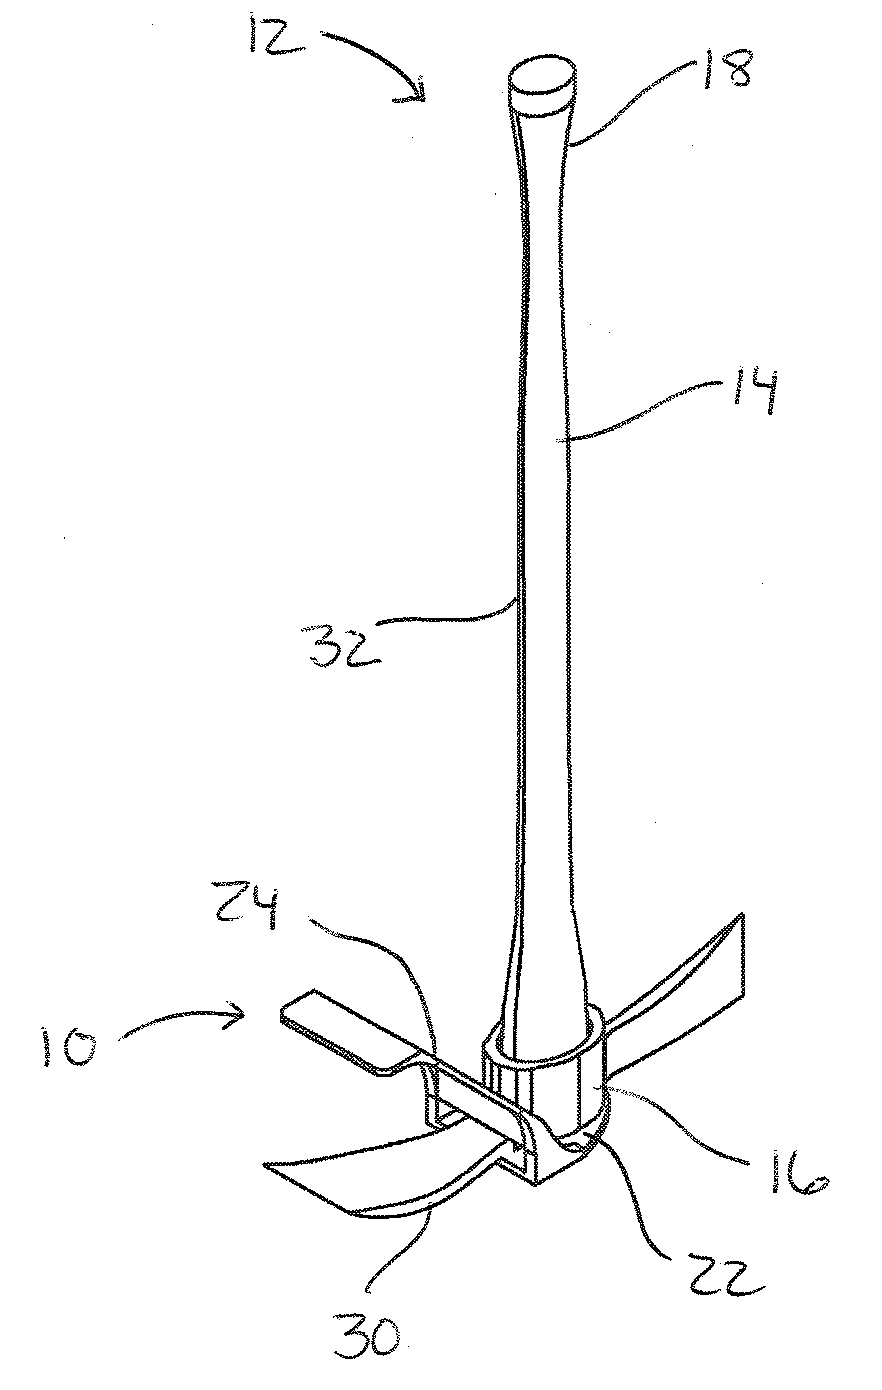 Shield attachment for hand-held digging tools